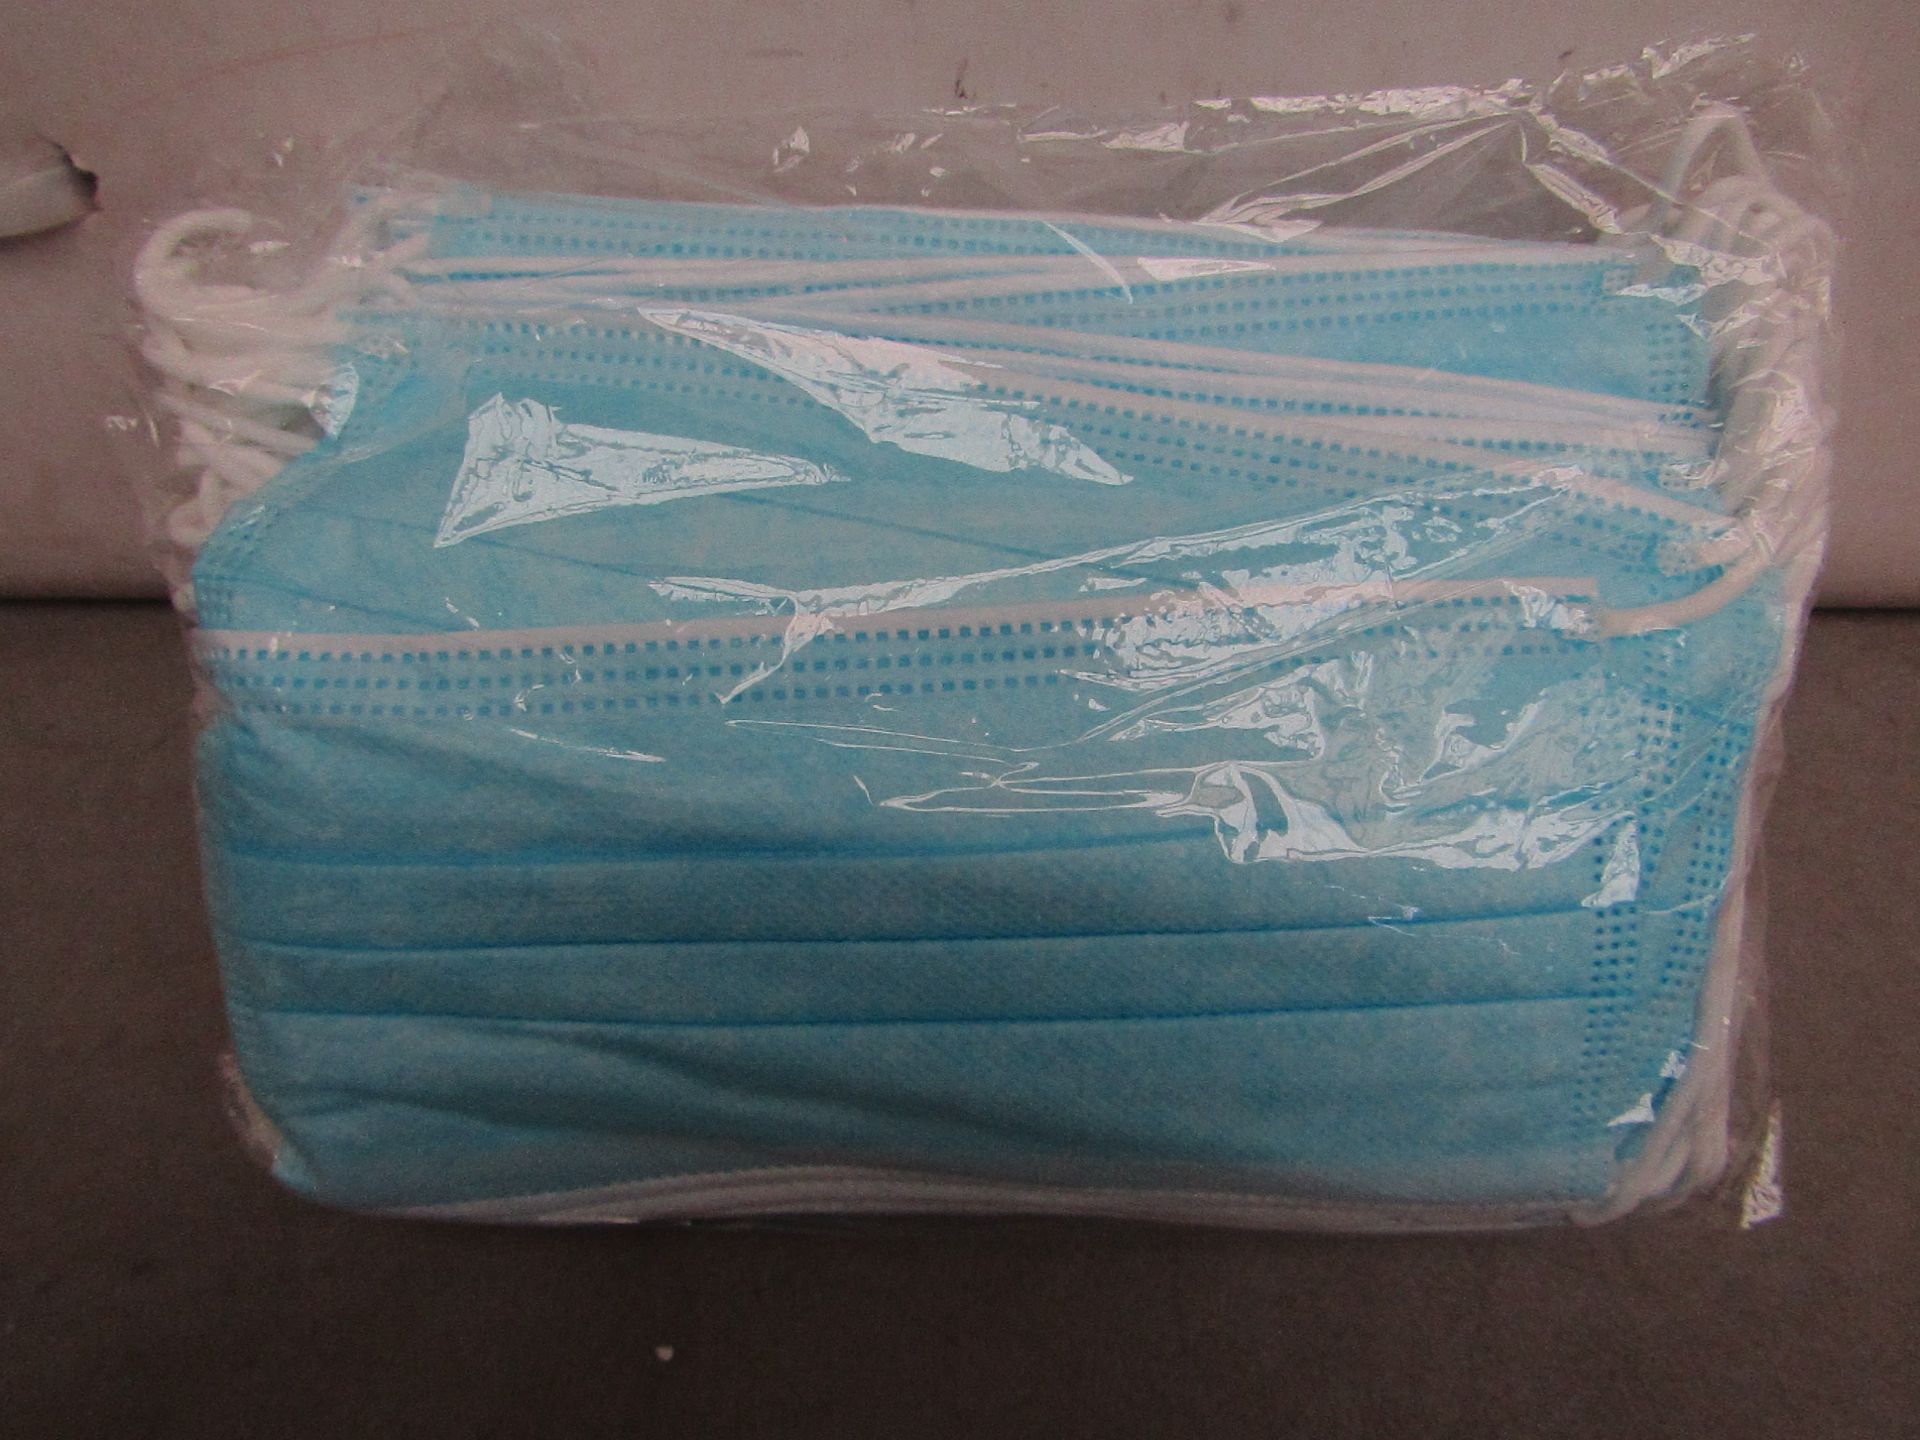 5x Packet of 50x Huisida Health Civil protective mask new and carry a production date of 31/03/ - Image 2 of 2